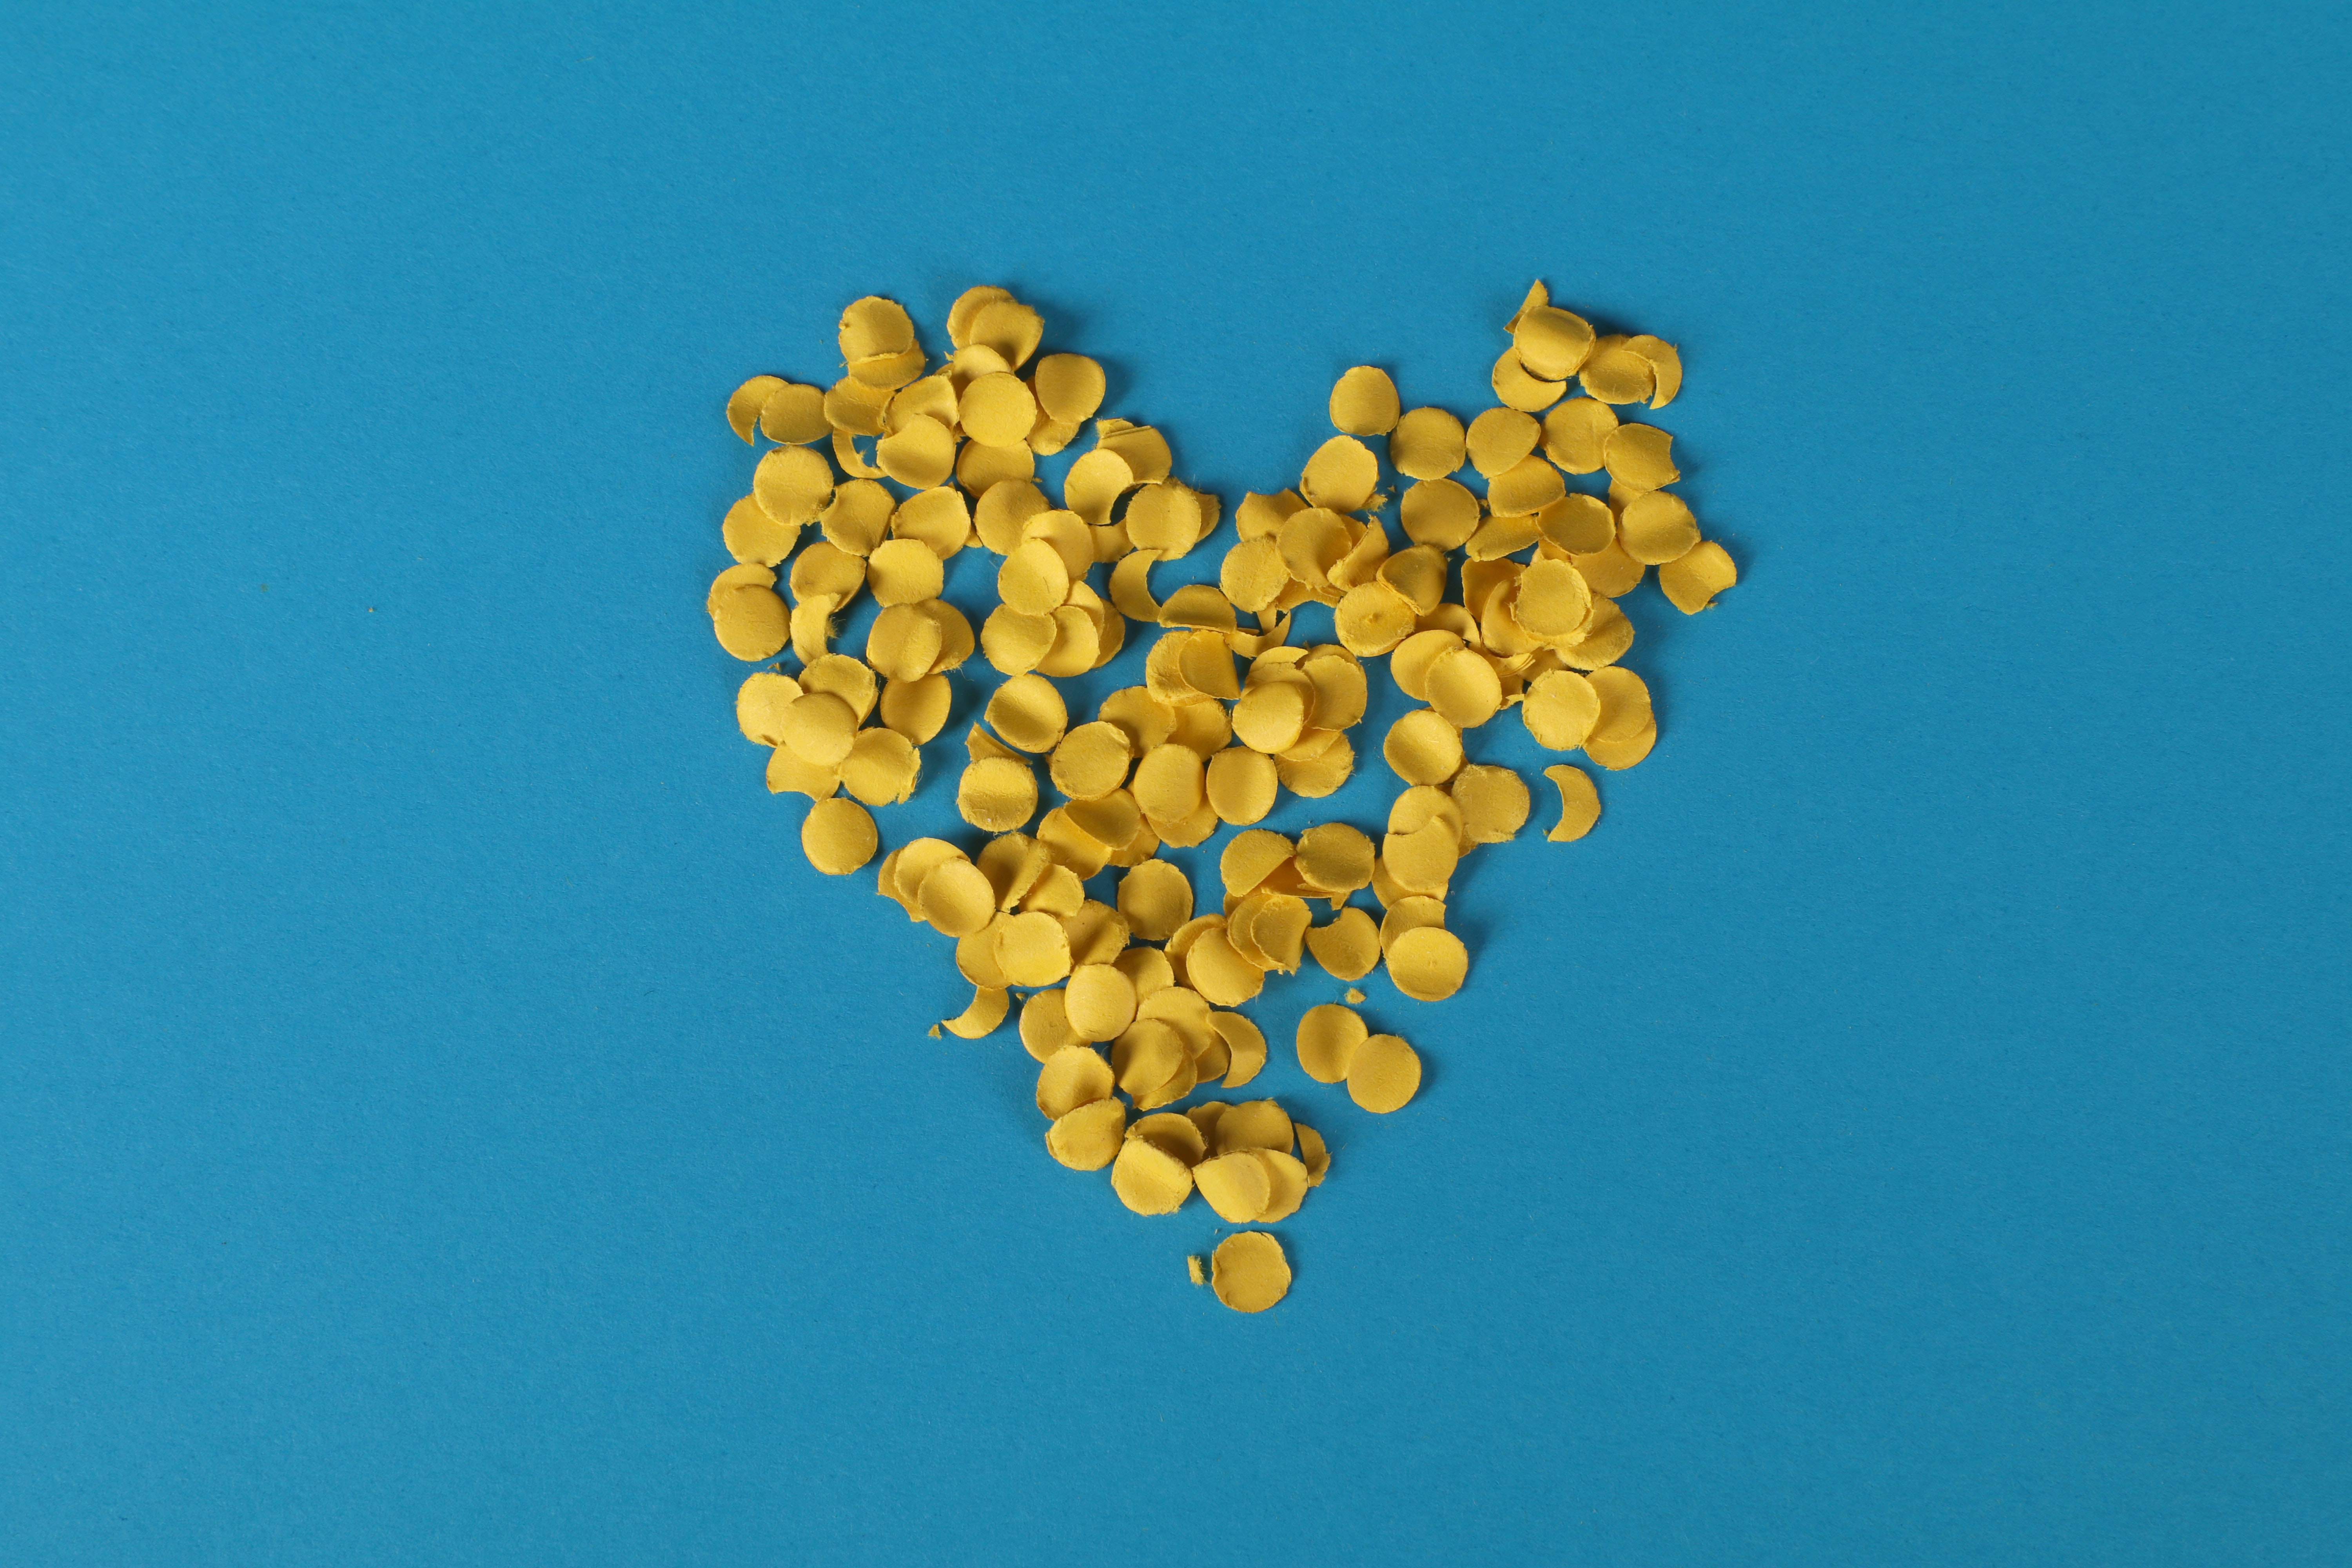 yellow heart made out of confetti on a solid blue background.